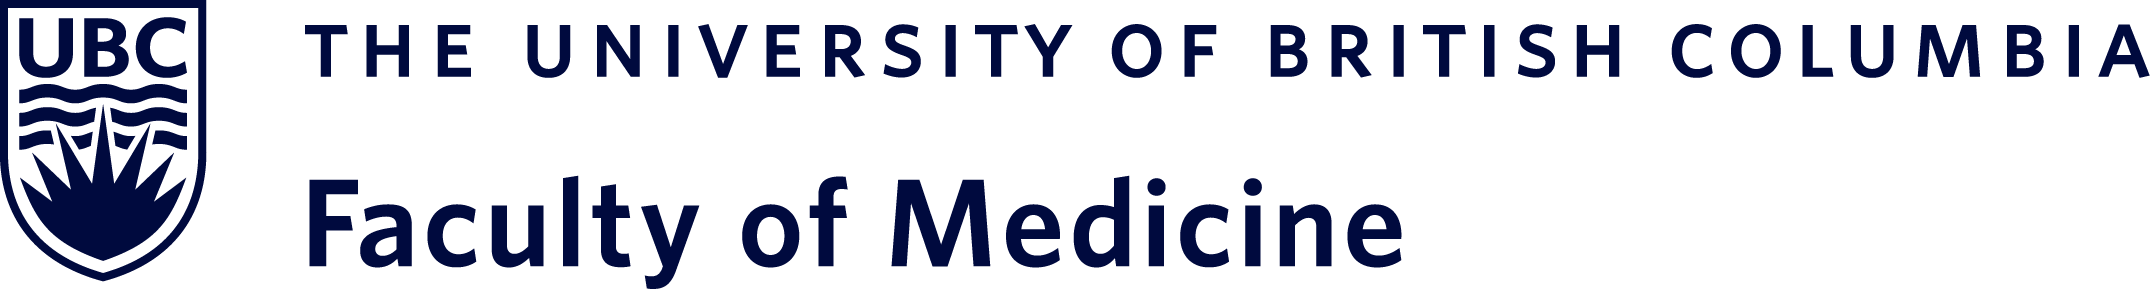 The University of British Columbia Faculty of Medicine